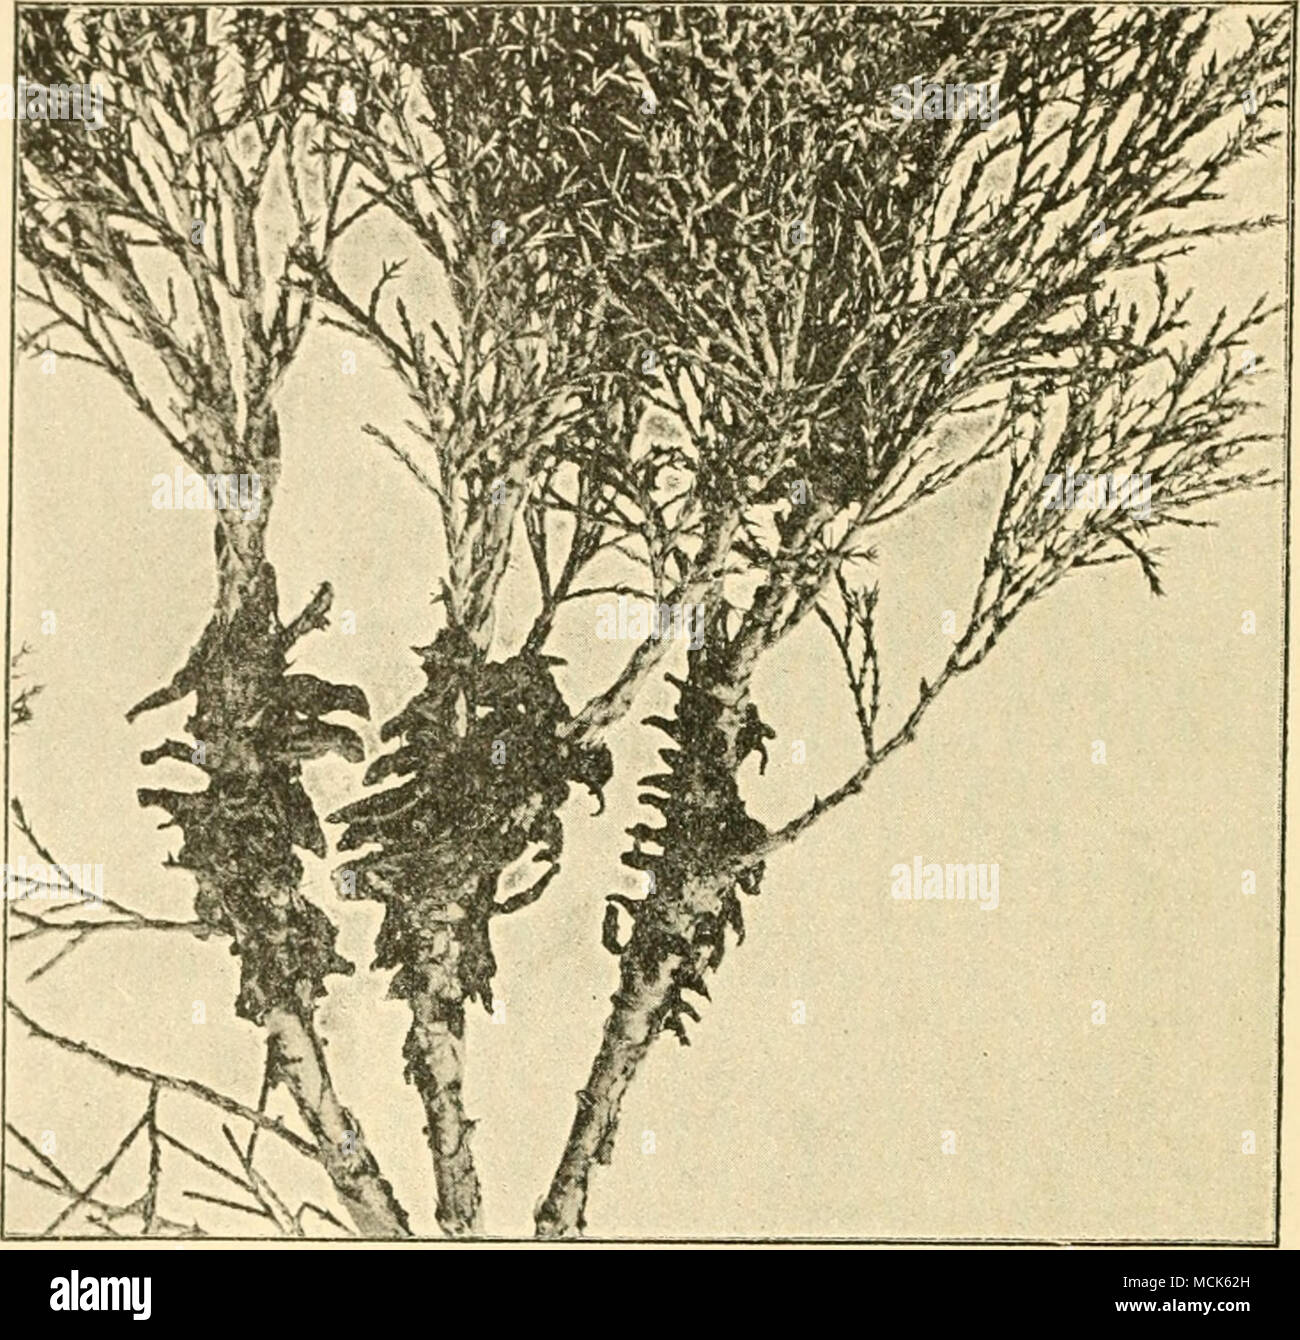 . Fig. 2^il—Gi/iiinos/&gt;orunpium xnbinae on twigs of Junipirux Sidjimi, at the time nf lilicnitiou of spores, (v. Tubeuf i&gt;hot.) twigs and scale-leaves. These bodies absorb water, swell, and run together, forming transparent gelatinous masses (Figs. 230 and 231). The teleutospores resemble those of G. junipcrinum, but liave only four germ-pores; they germinate on the gelatinous masses, and produce promycelia and sporidia. The latter germinate at once, chiefly on leaves of Pyrus com- munis. The pycnidia are produced on the upper epidermis as sticky yellow spots bearing darker dot-like pycn Stock Photo